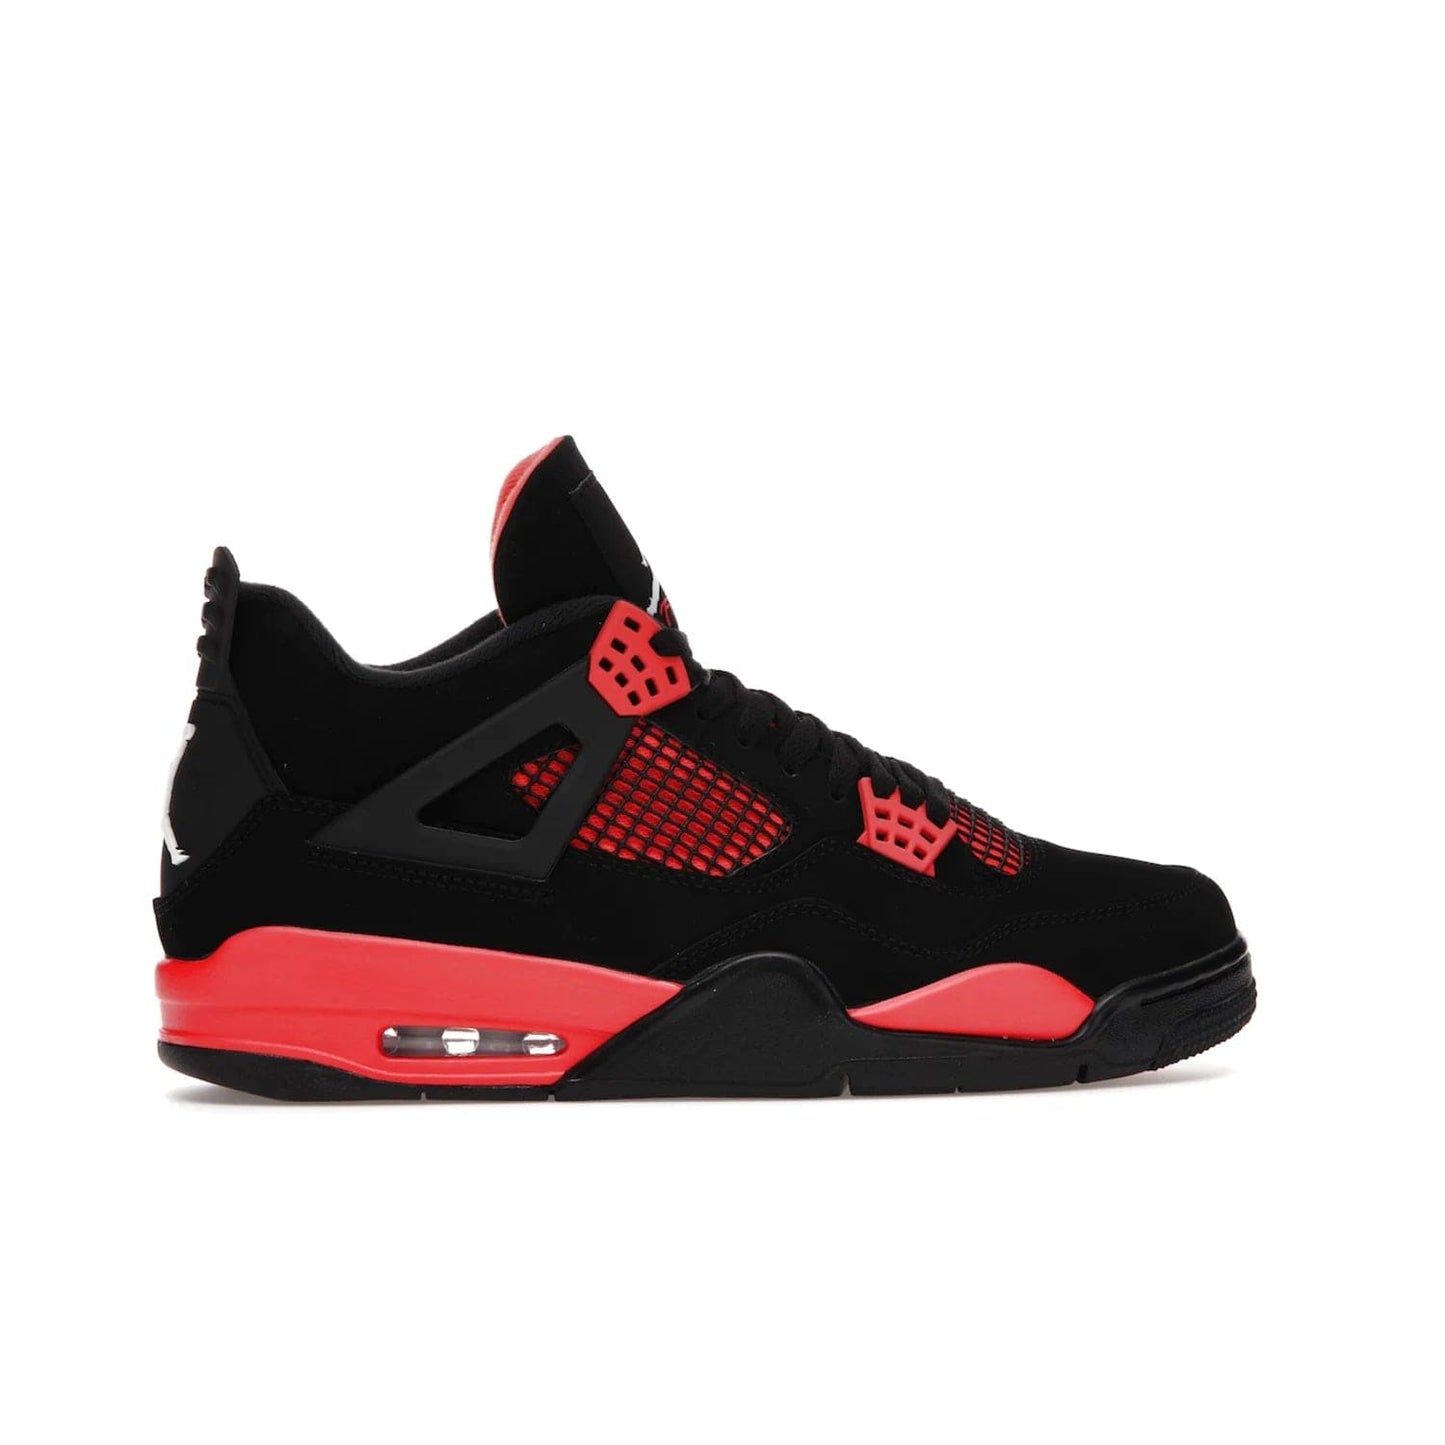 Jordan 4 Retro Red Thunder - Image 36 - Only at www.BallersClubKickz.com - Upscale your footwear with the Air Jordan 4 Retro Red Thunder. Featuring a Durabuck upper, red underlays, signature Flight patch, and vibrant red midsole, this retro sneaker adds style and edge. Releases in January 2022.